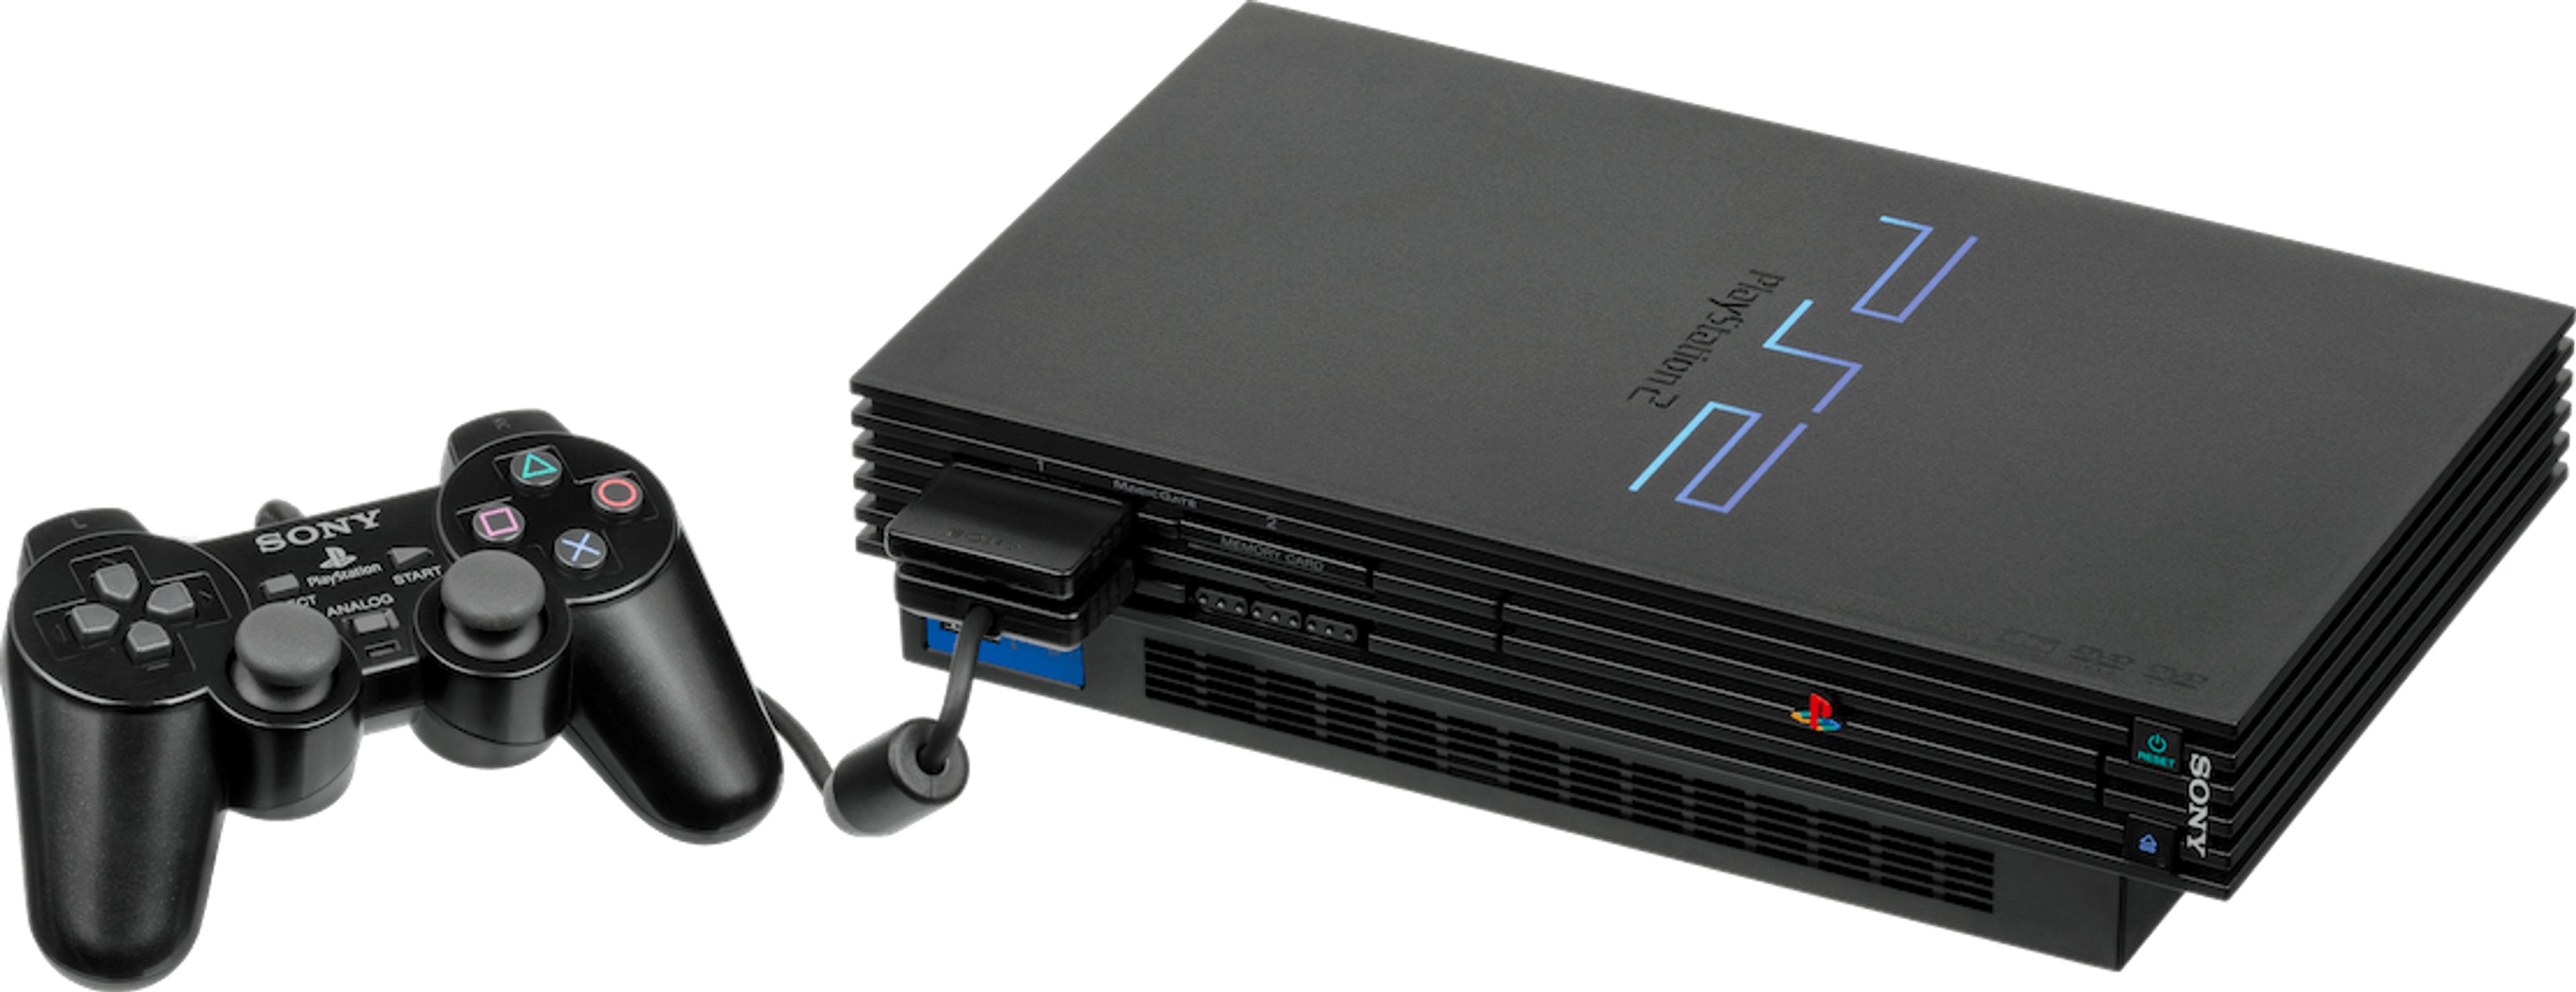 The PlayStation 2 released in 2000 | Source